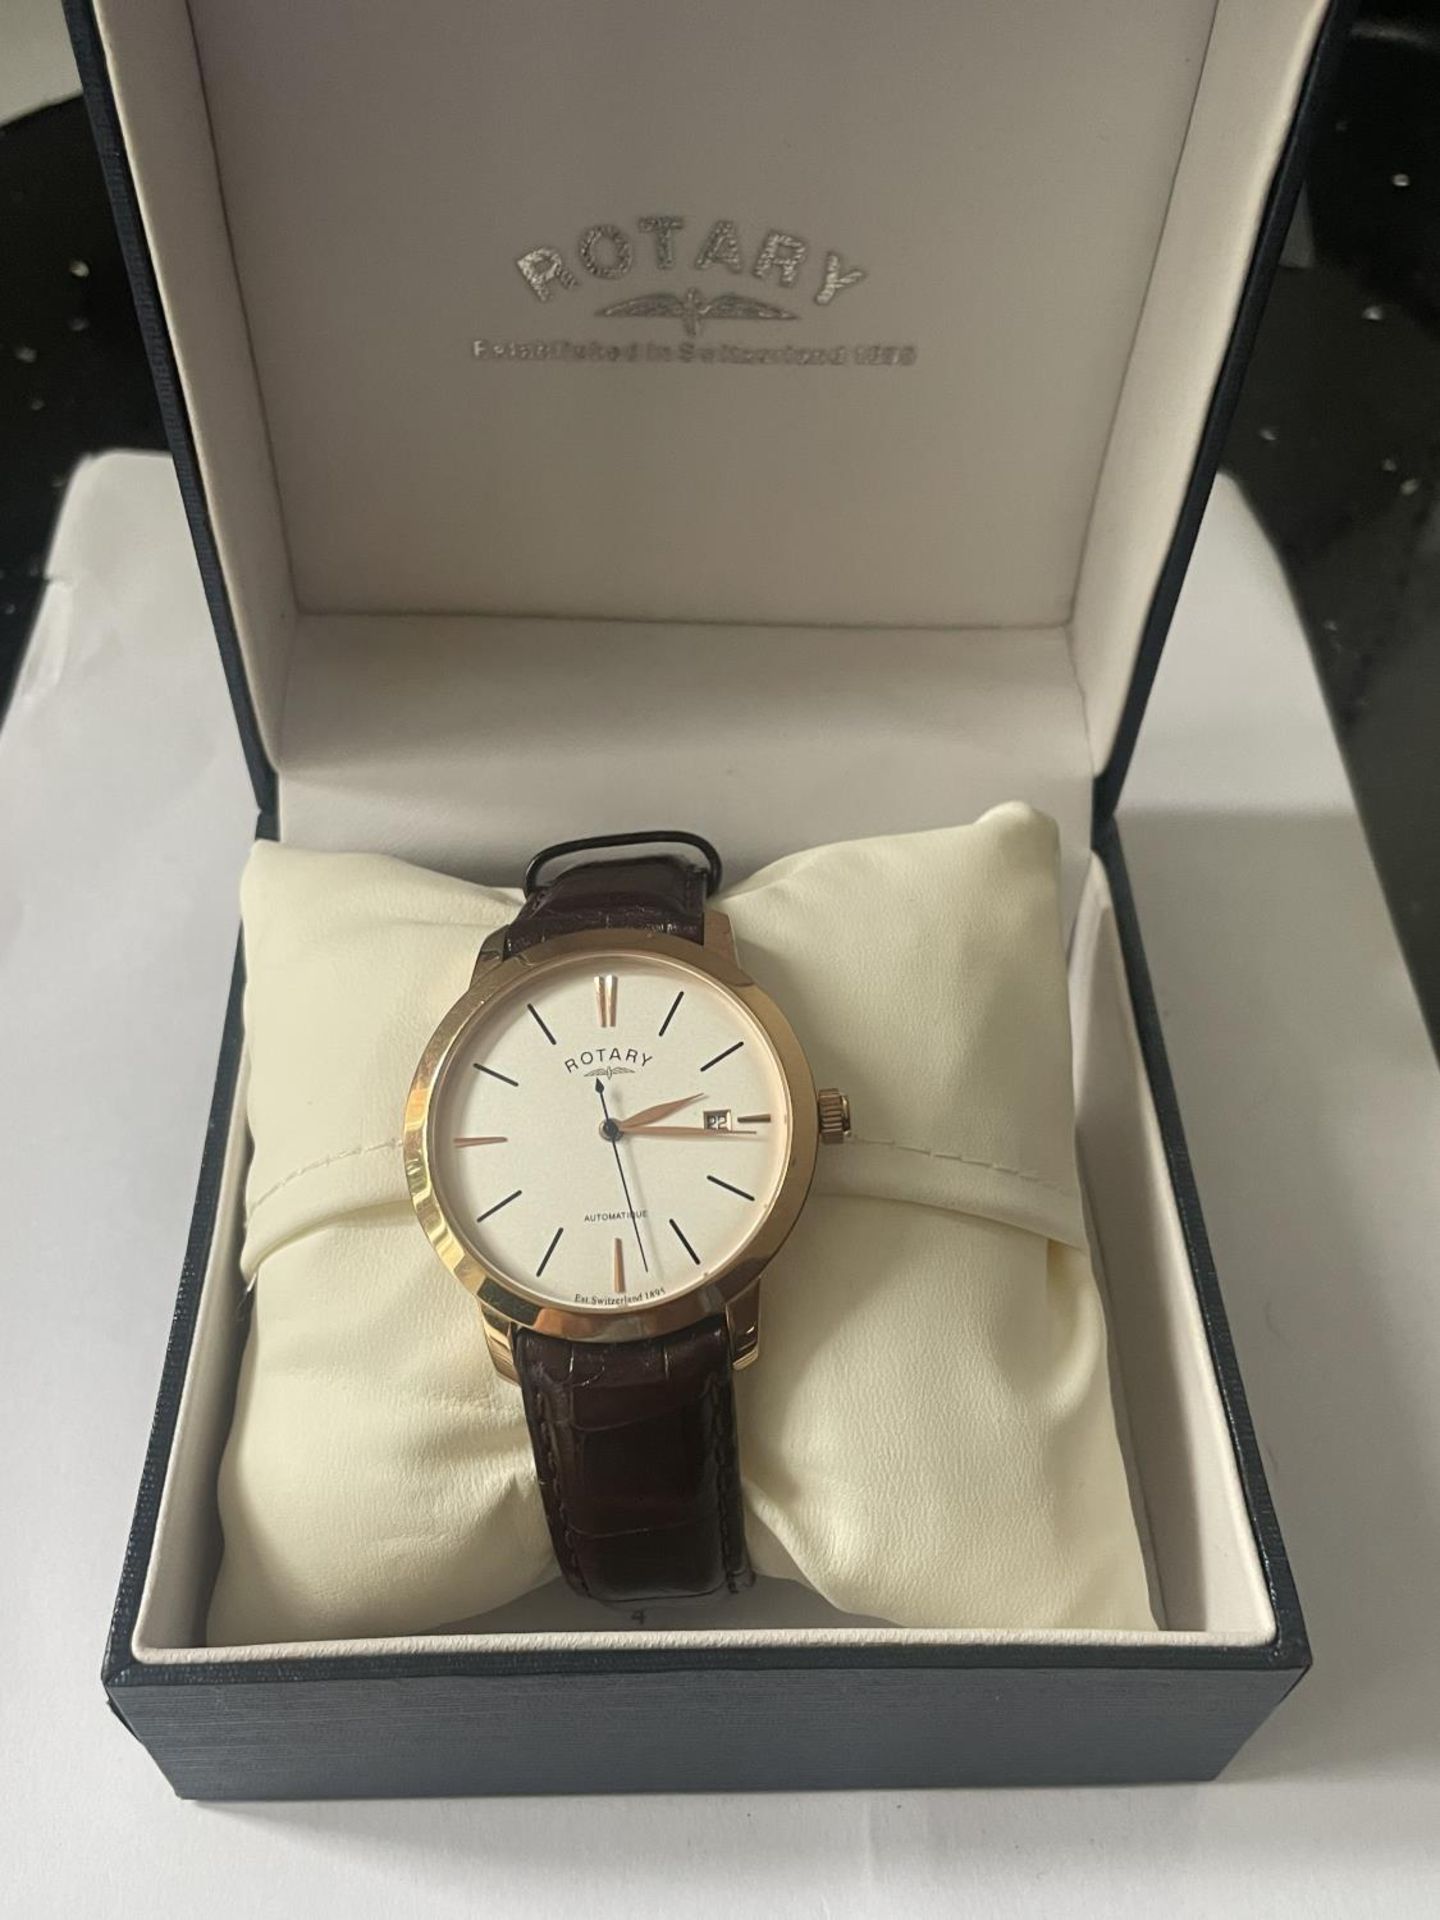 A ROTARY WRIST WATCH PLO:006533 AUTOMATIC WATERPROOF 100M AS NEW WITH PRESENTSTION BOX SEEN